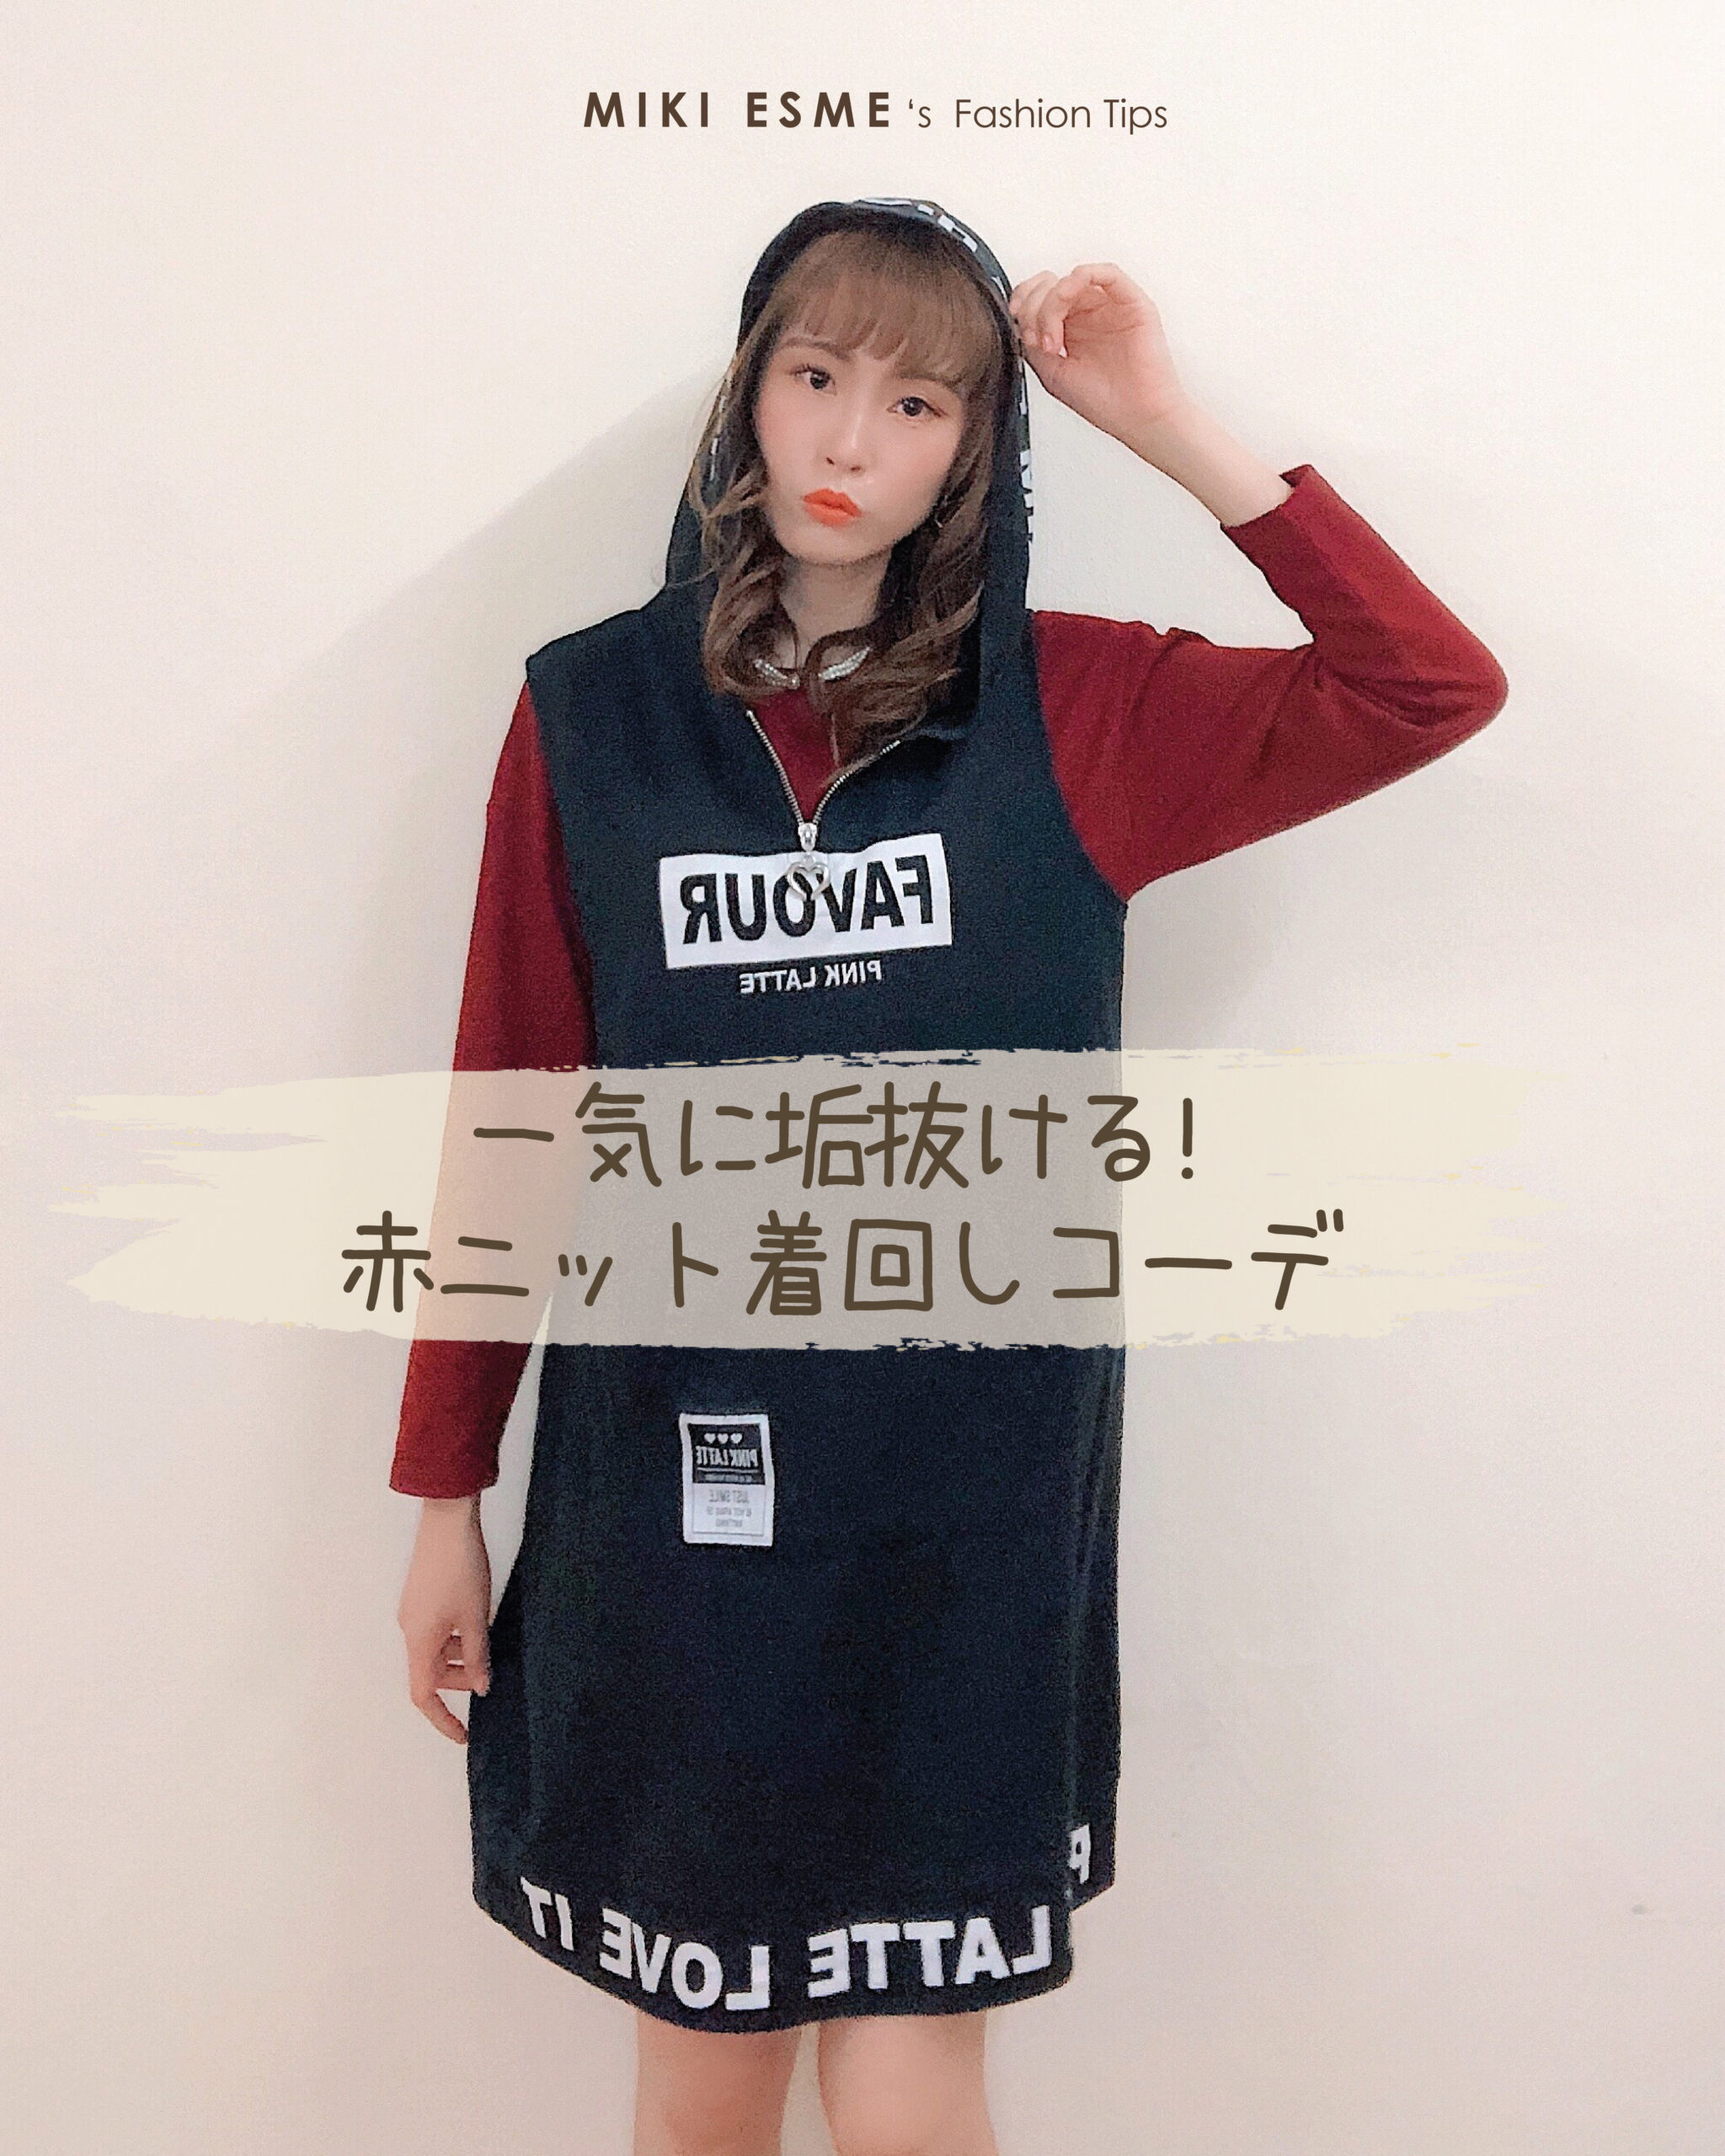 5 Red Knit Sweater Outfit Ideas : How to Style Your Red Sweater 一気に垢抜ける! 『赤ニットコーデ』5選(c)MikiEsme.com